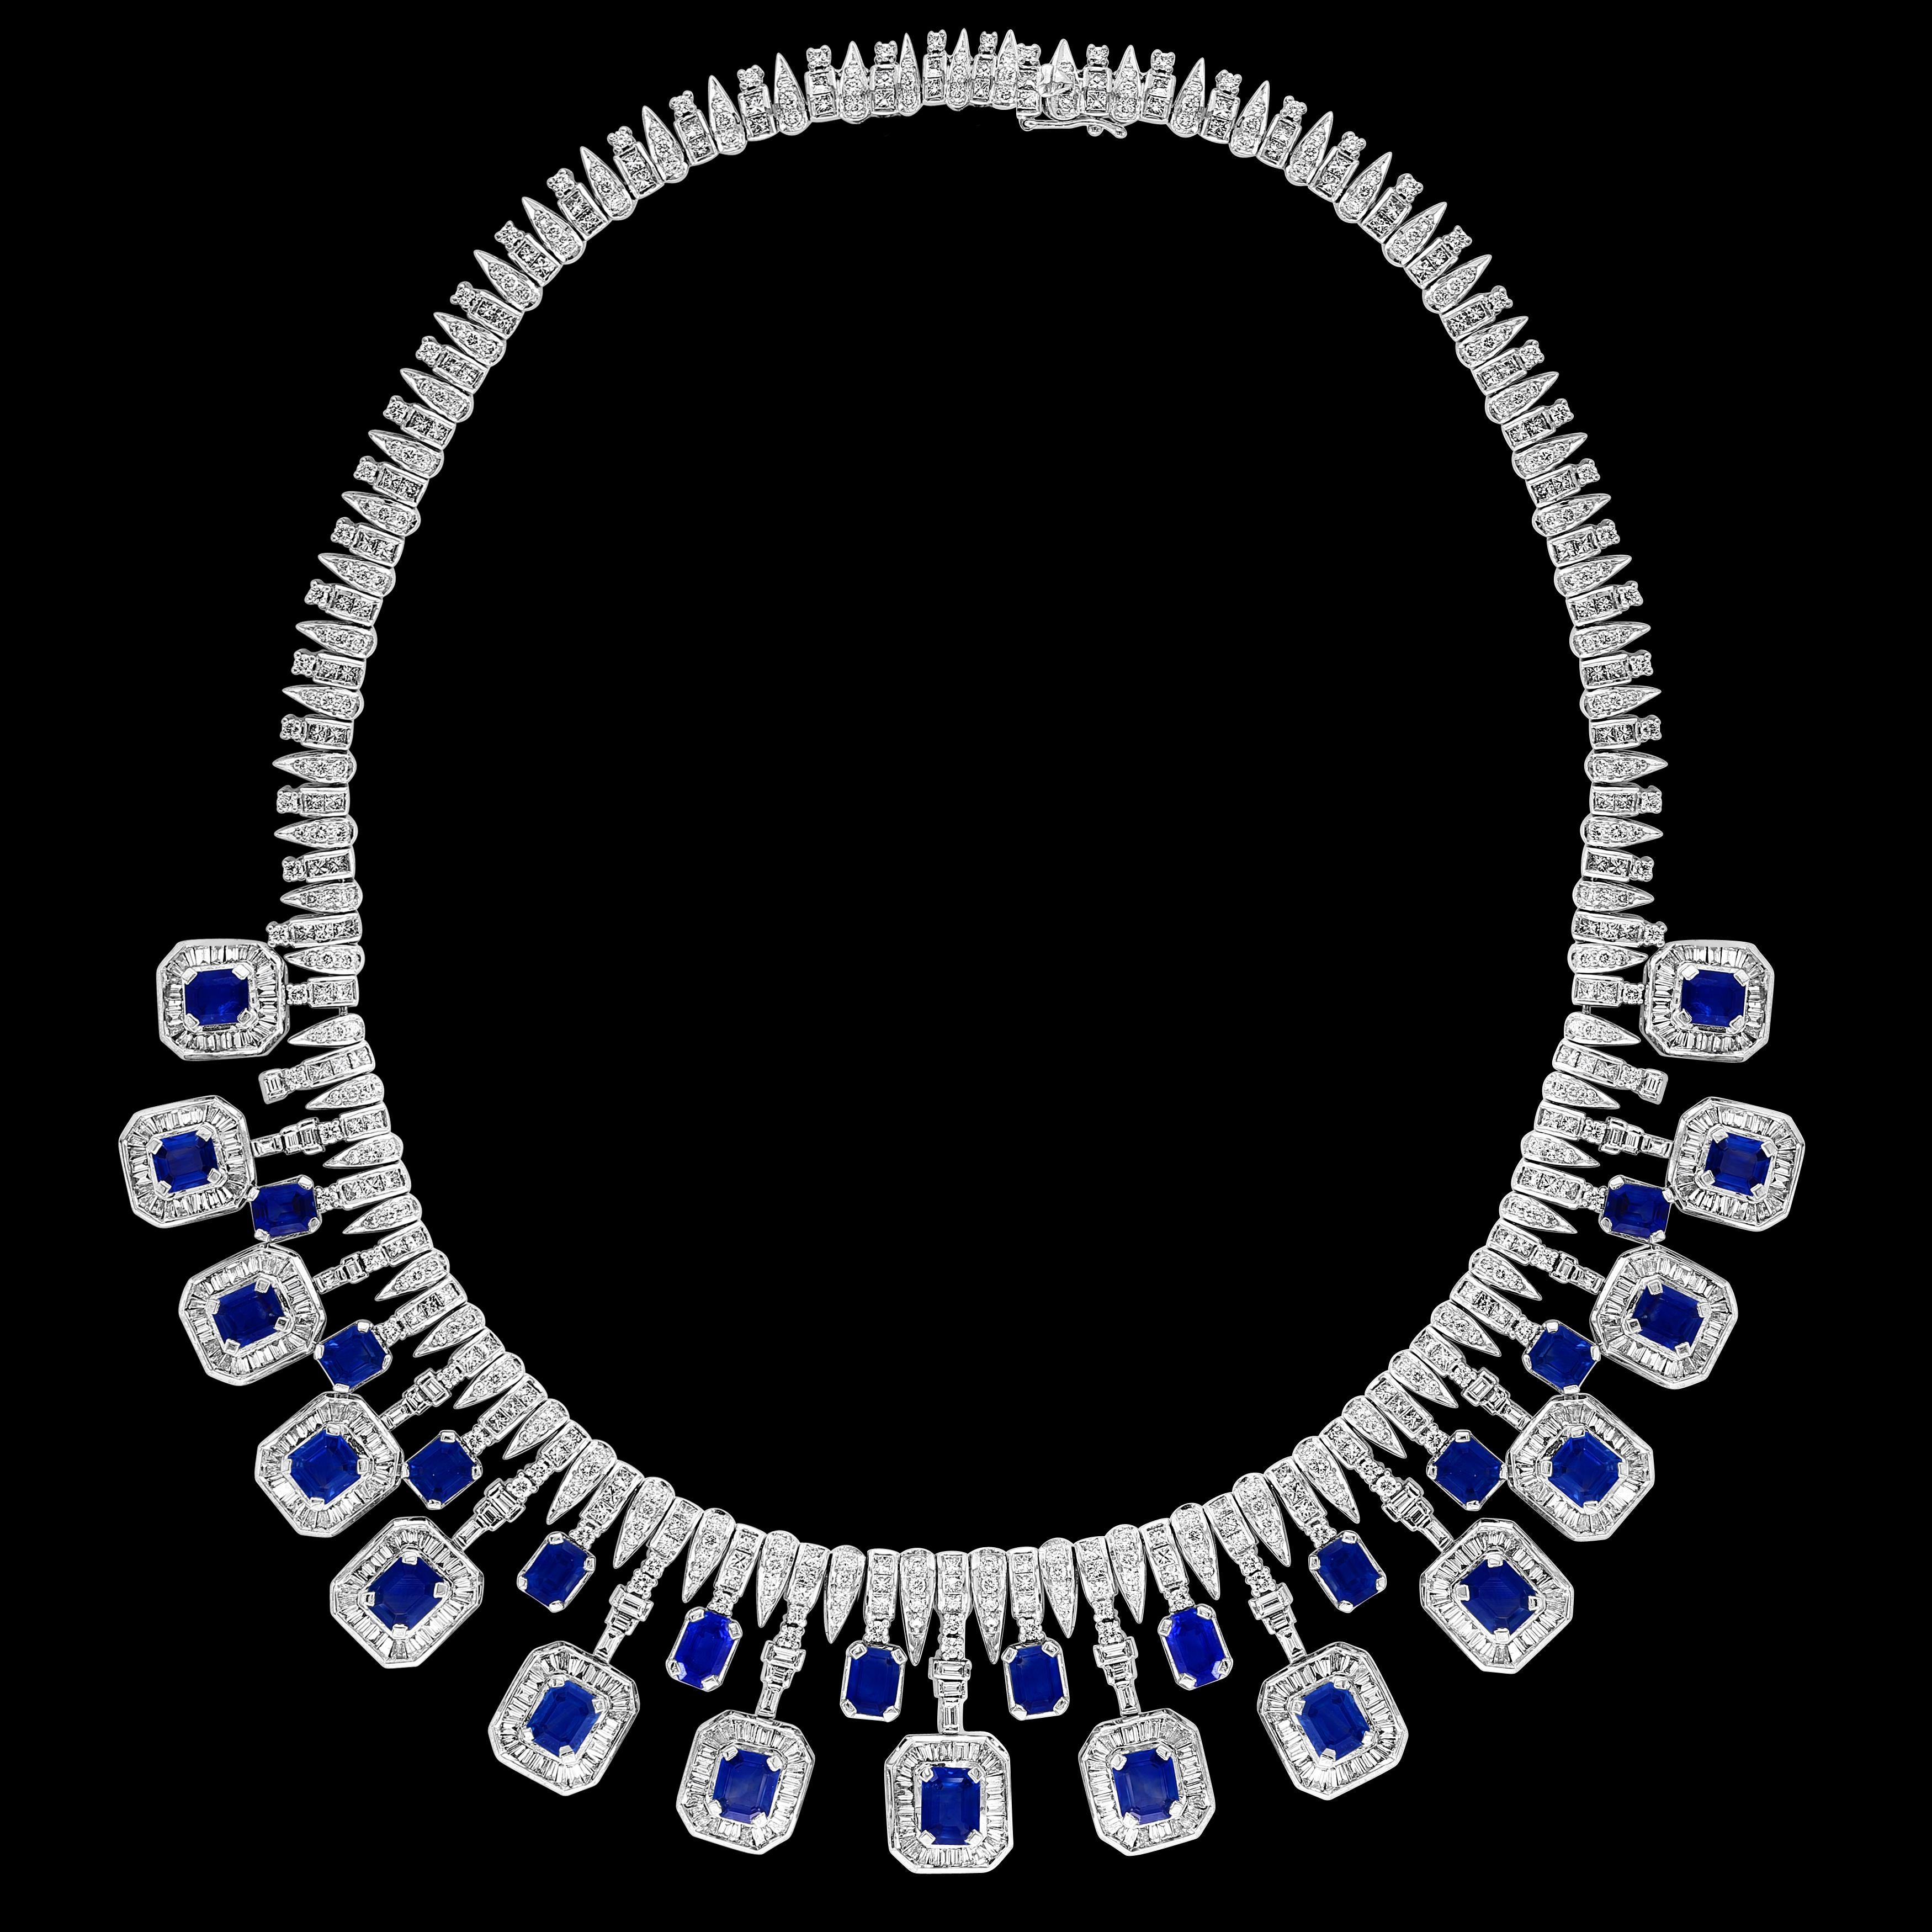 GIA Certified 54 Ct Emerald cut Blue Sapphire & 22 Ct Diamond Necklace in 18 Karat White Gold
This bridal Necklace  made out of 18 Karat gold .Necklace consisting of 27 emerald cut Blue sapphires , each surrounded by baguettes diamonds   Total